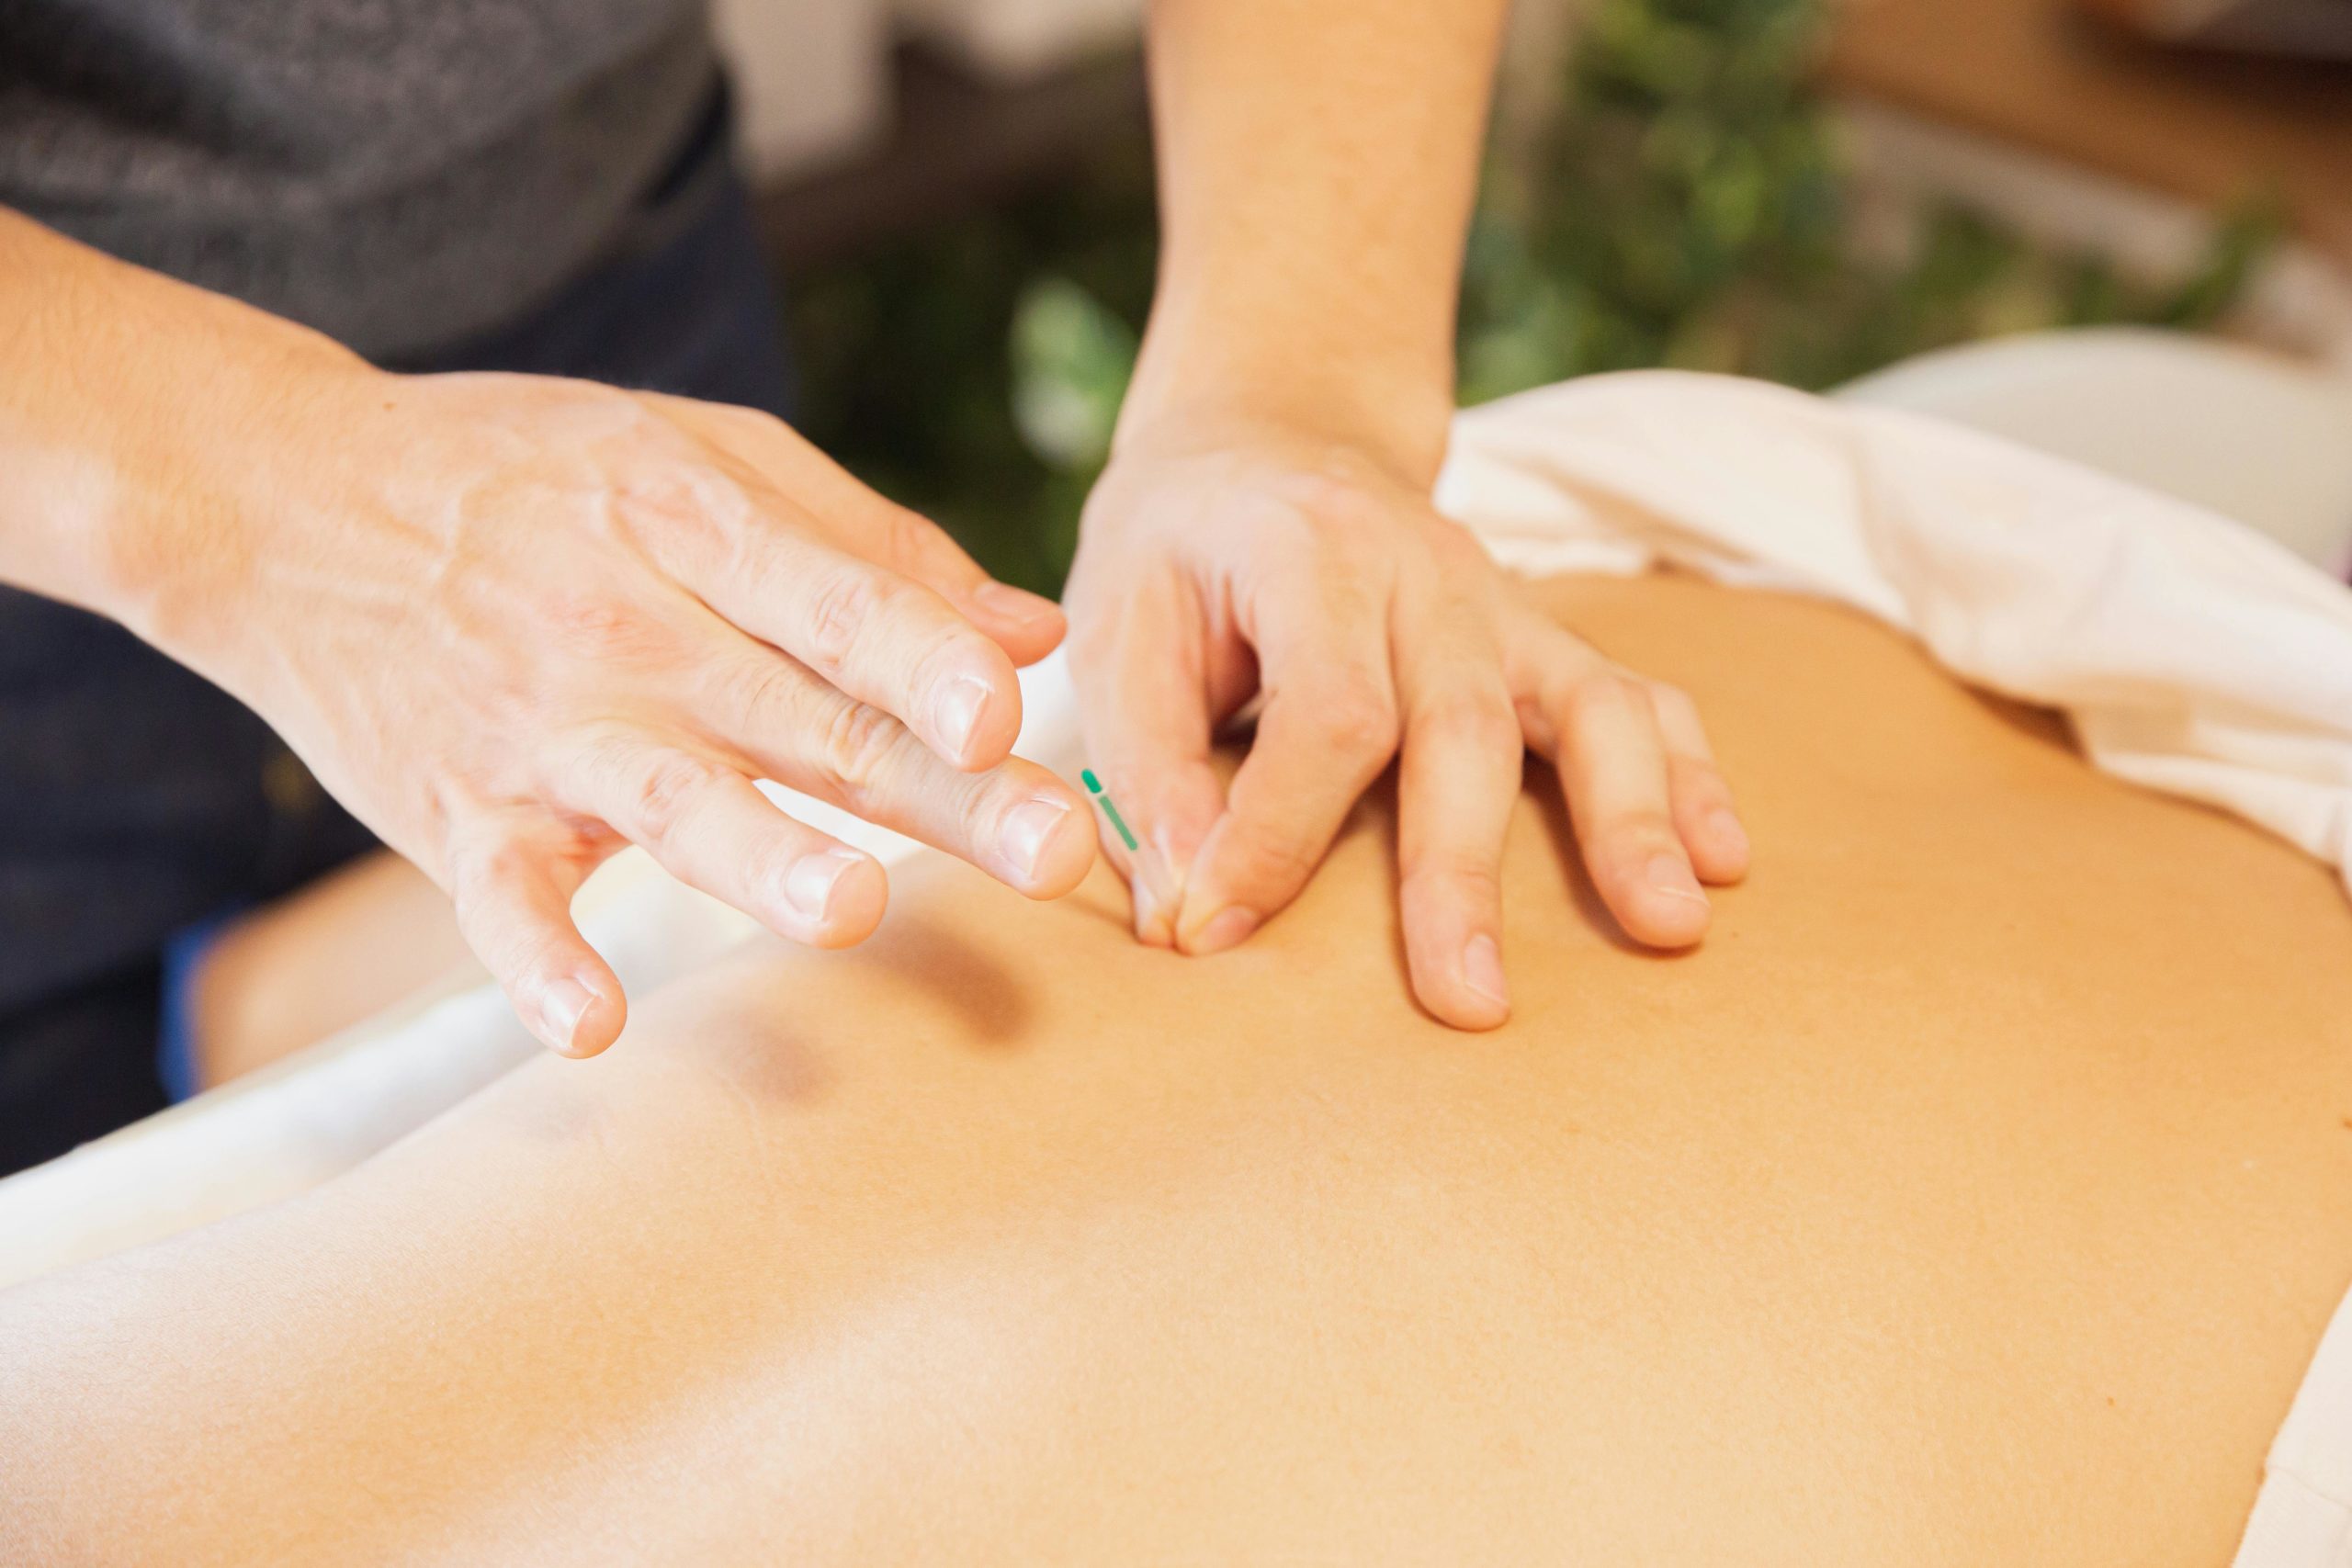 Acupuncture for pain, wellness, healing